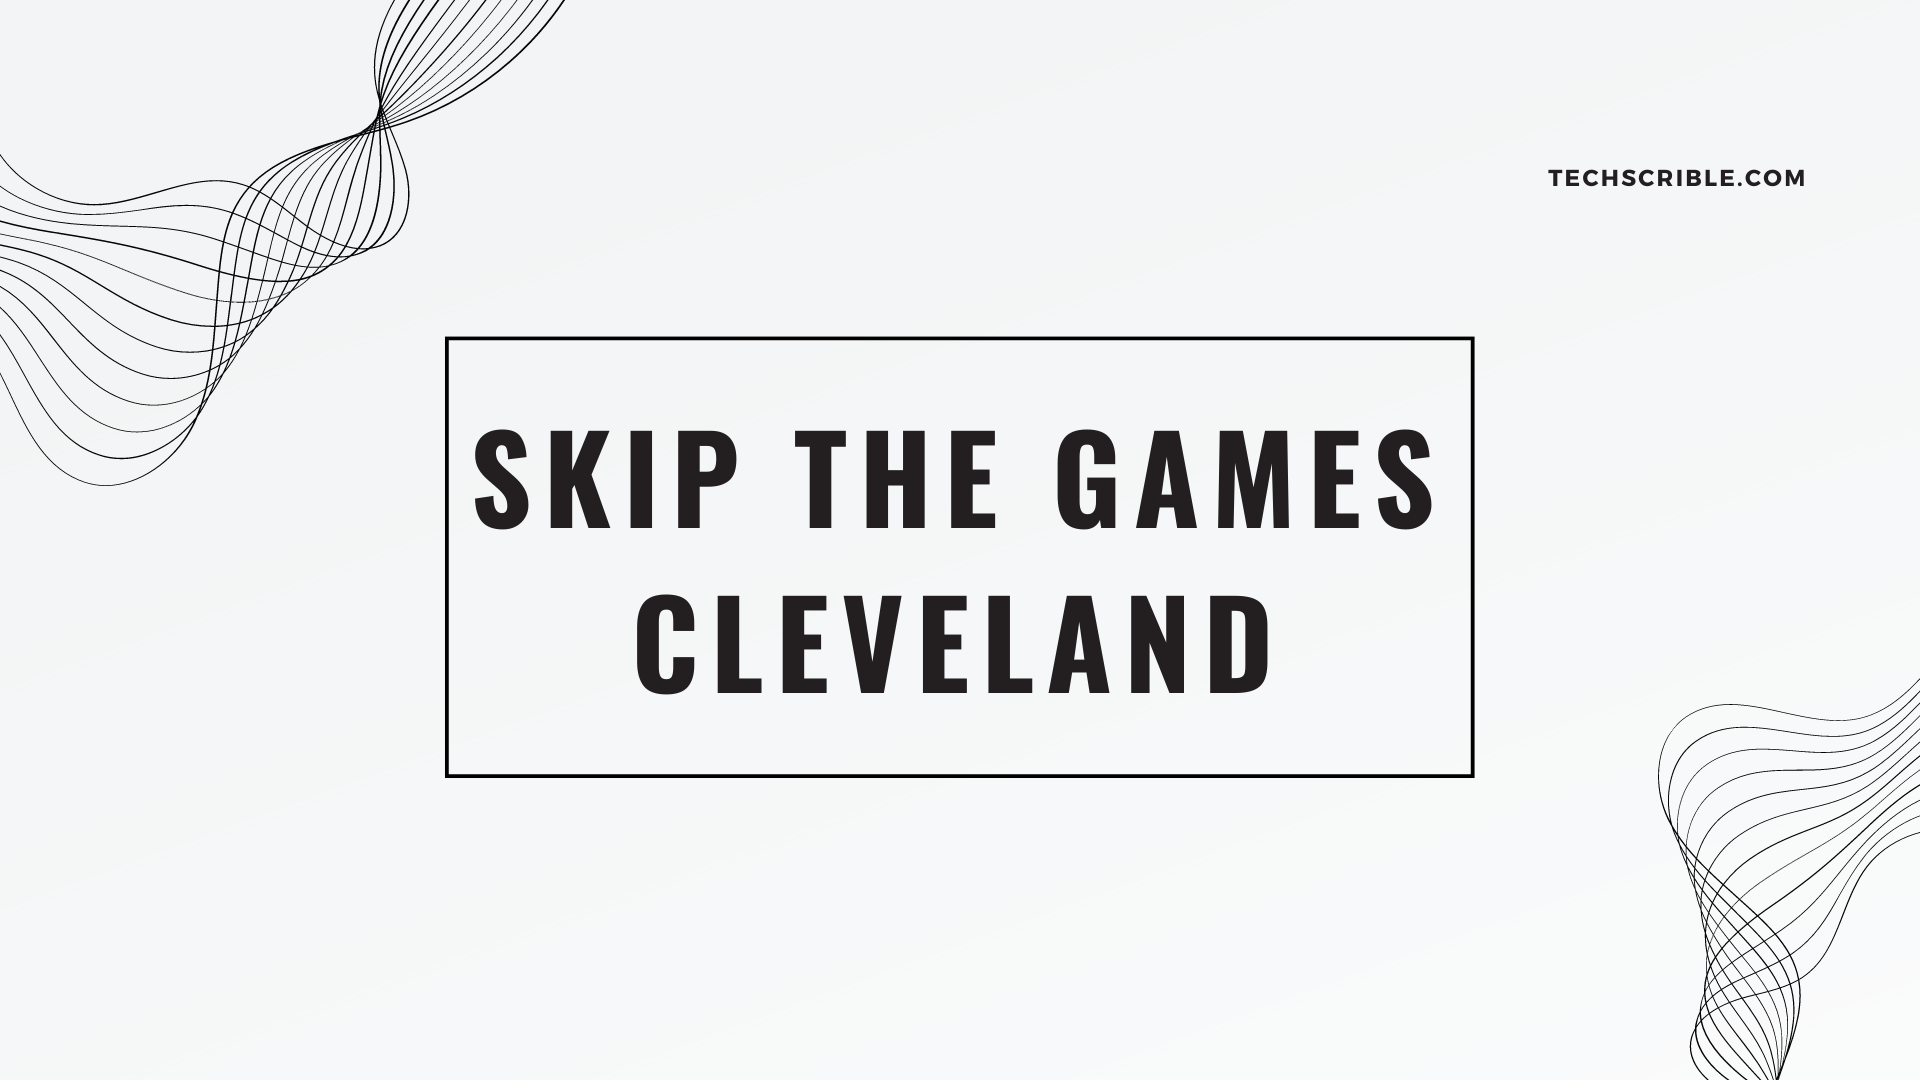 Skip the Games Cleveland